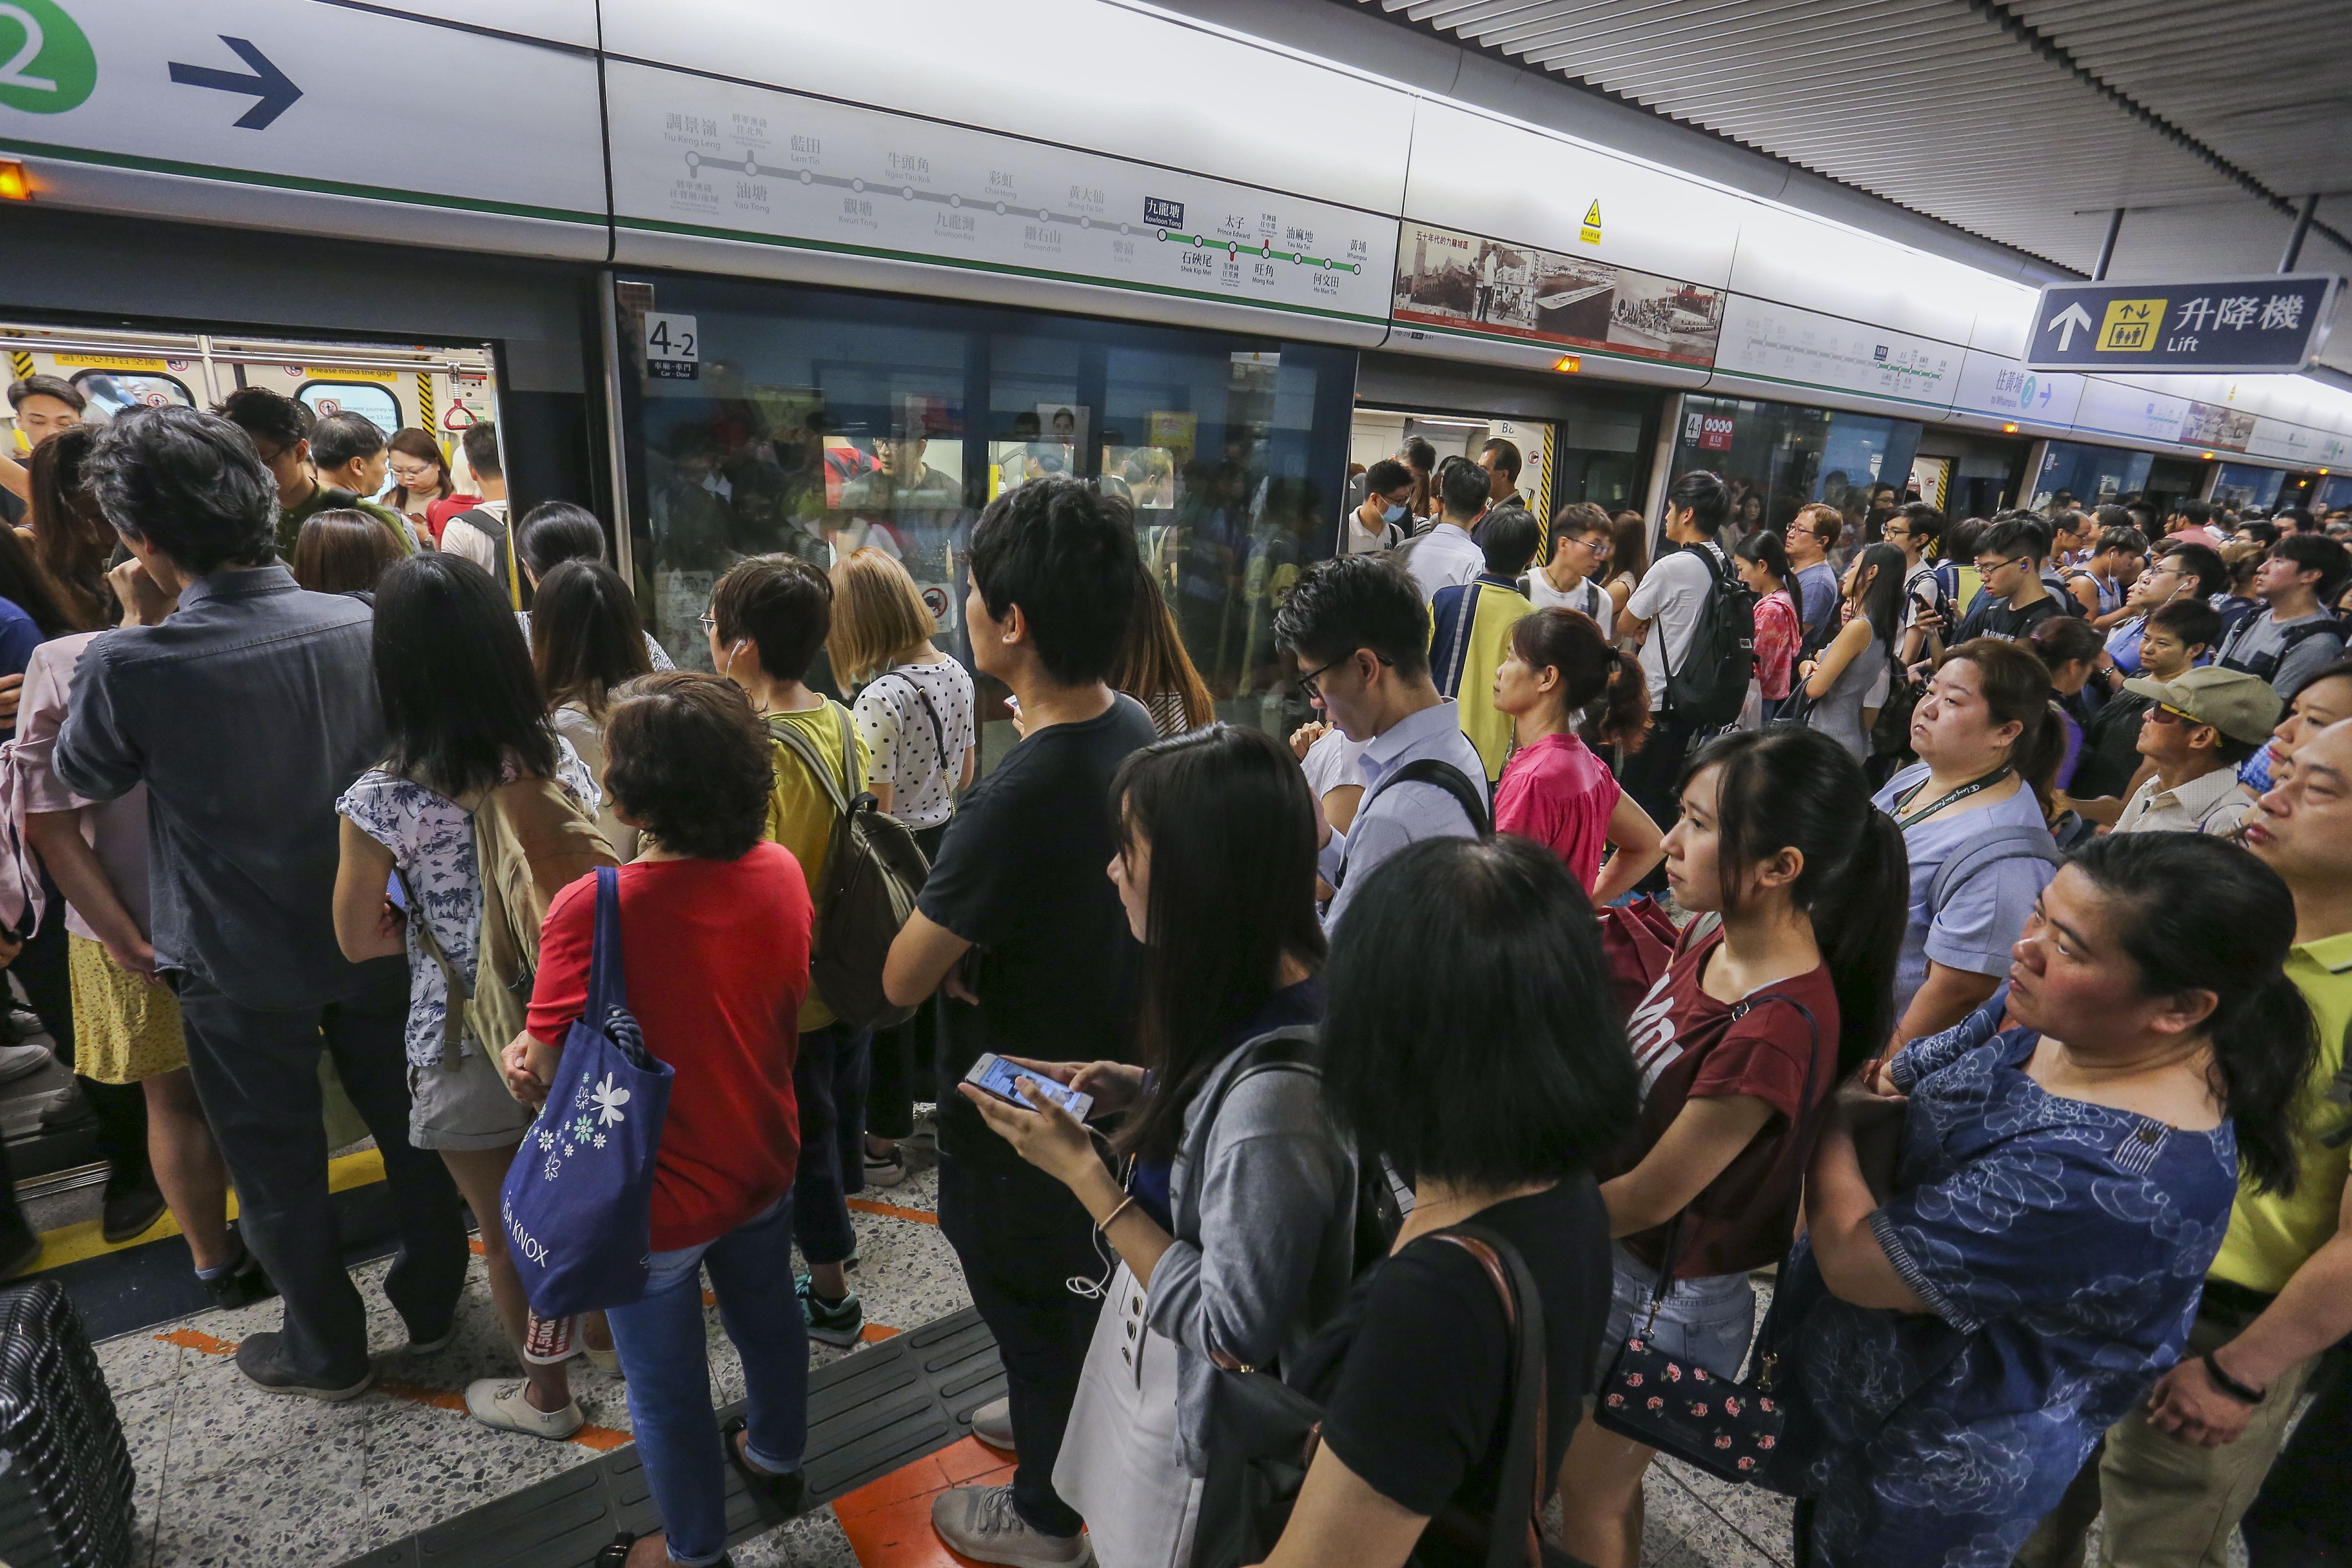 Commuters queue for a train during peak hours at Kowloon Tong station on May 25. The MTR Corp, which operates the city’s rail system, has been embroiled in a series of controversies over shoddy work recently. Photo Dickson Lee